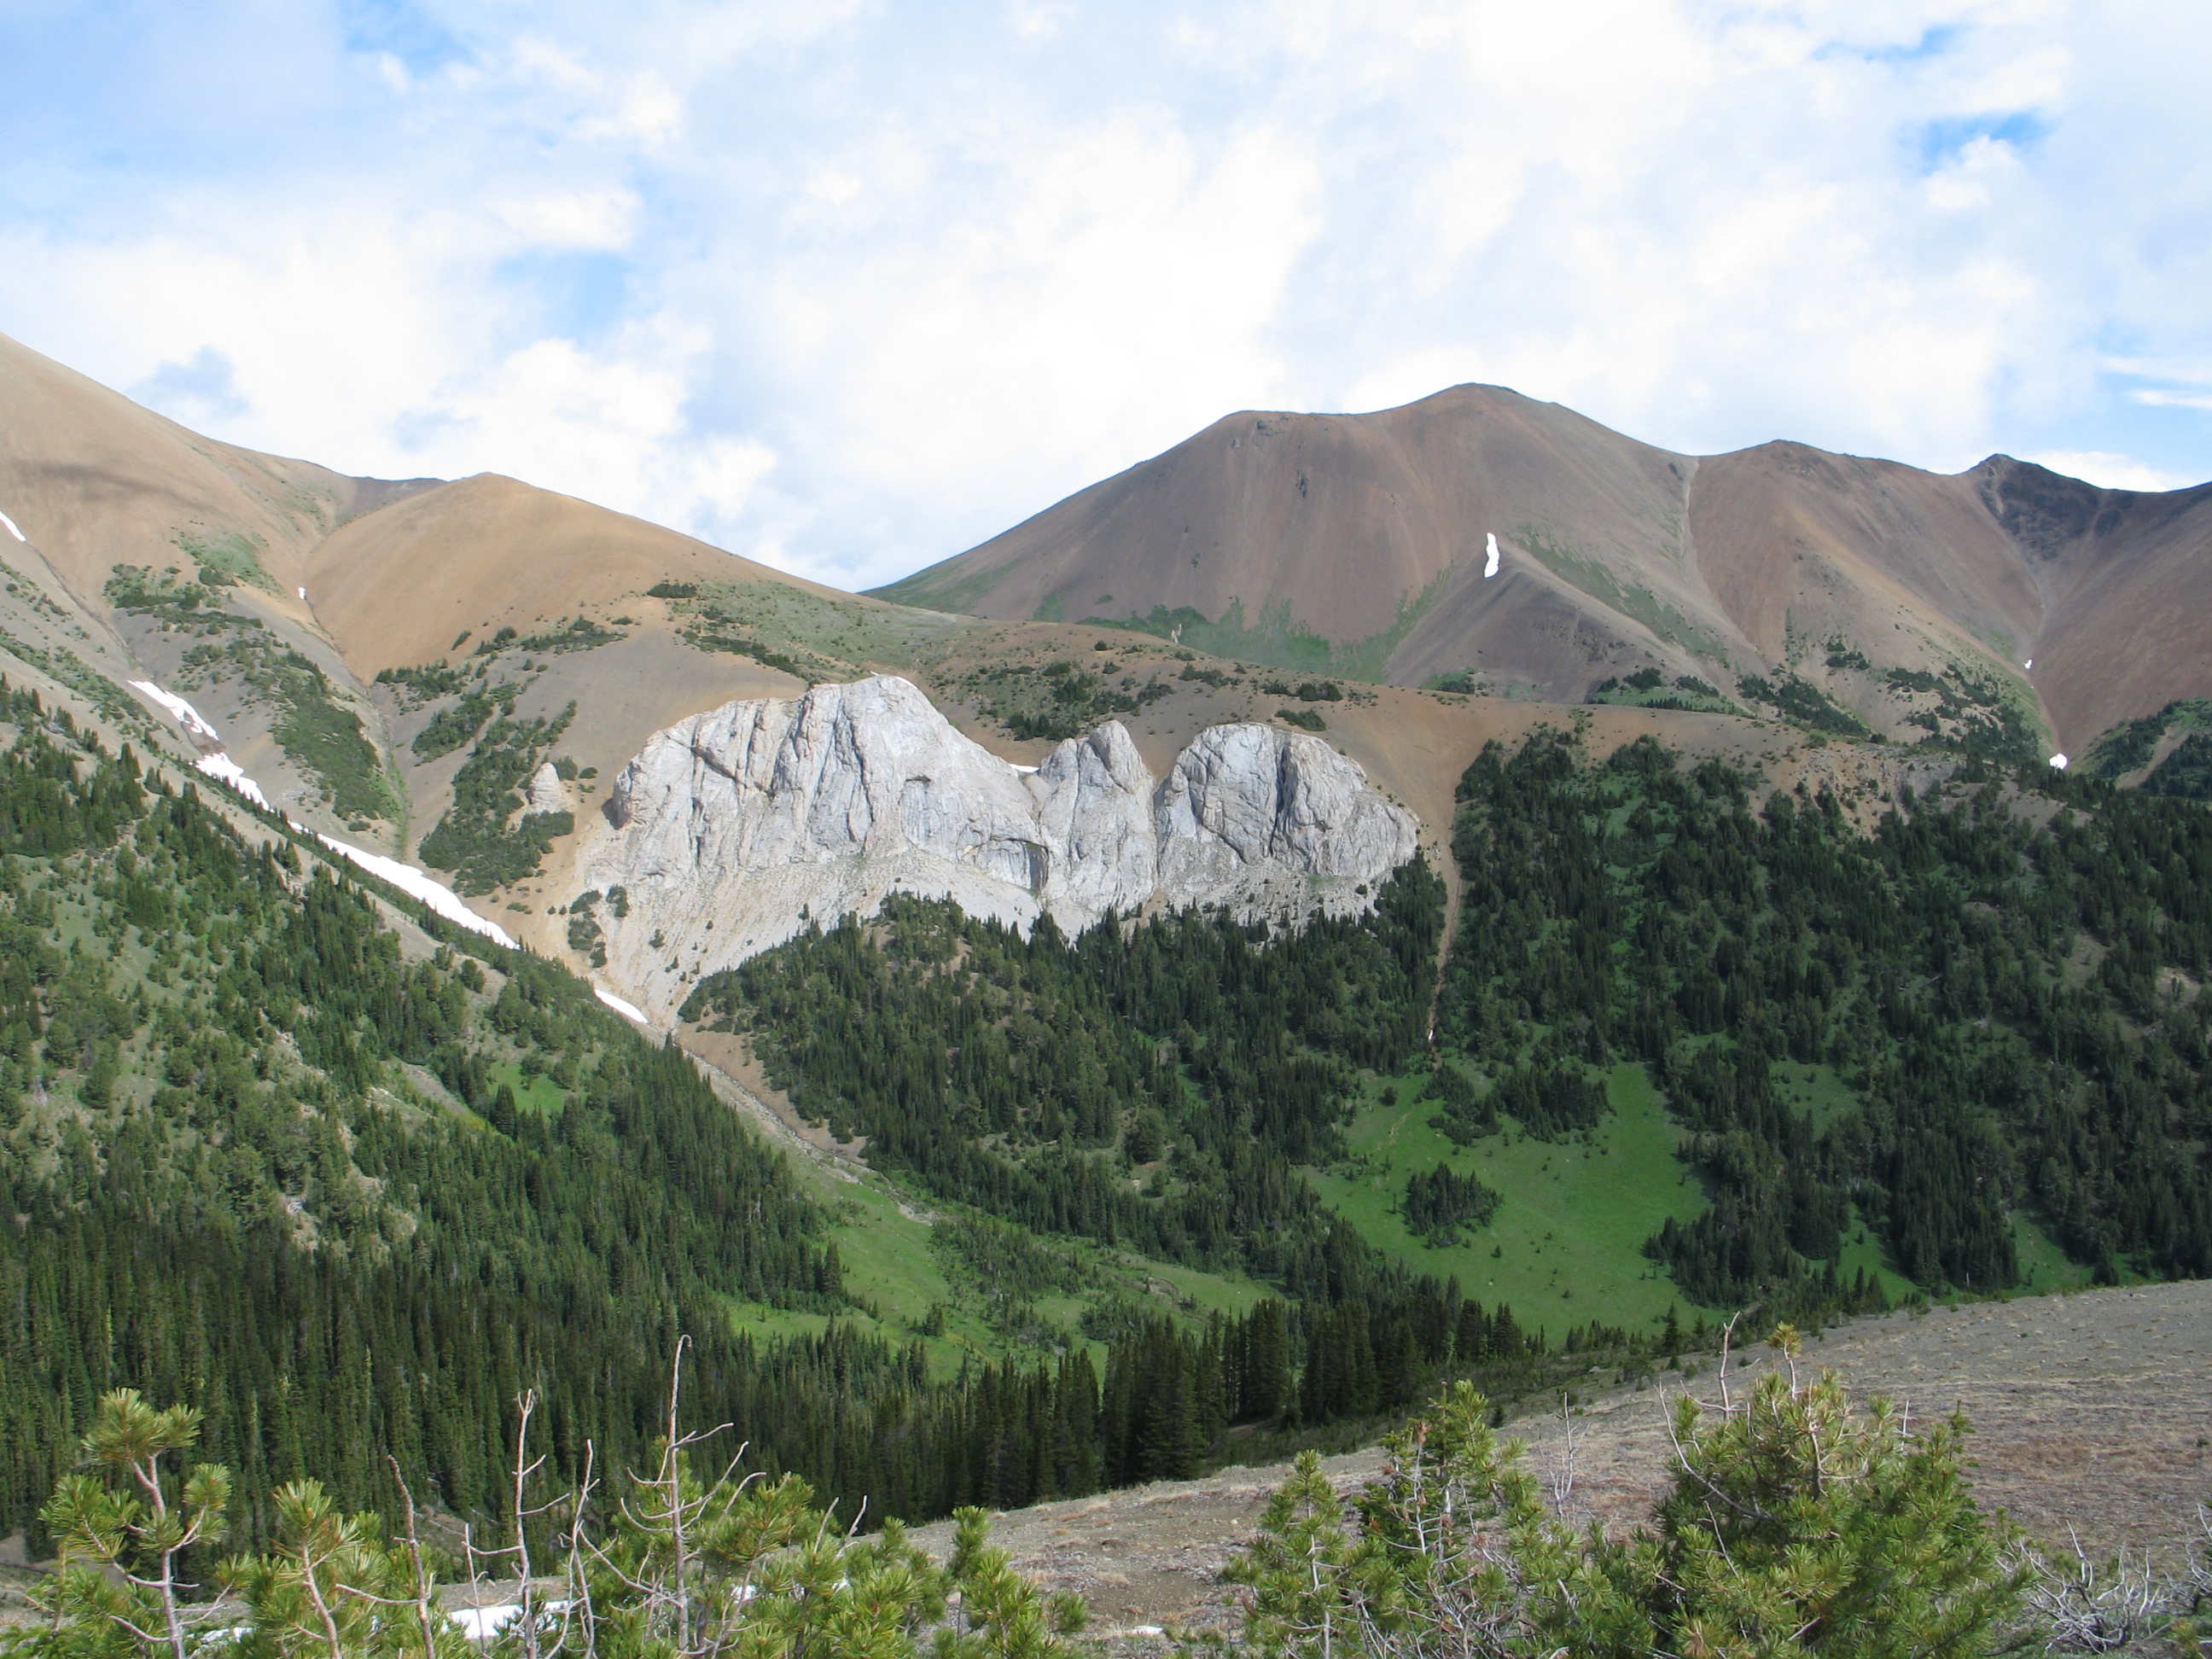 A typical view in the Chilcotin Ark: sandy shale mountain tops